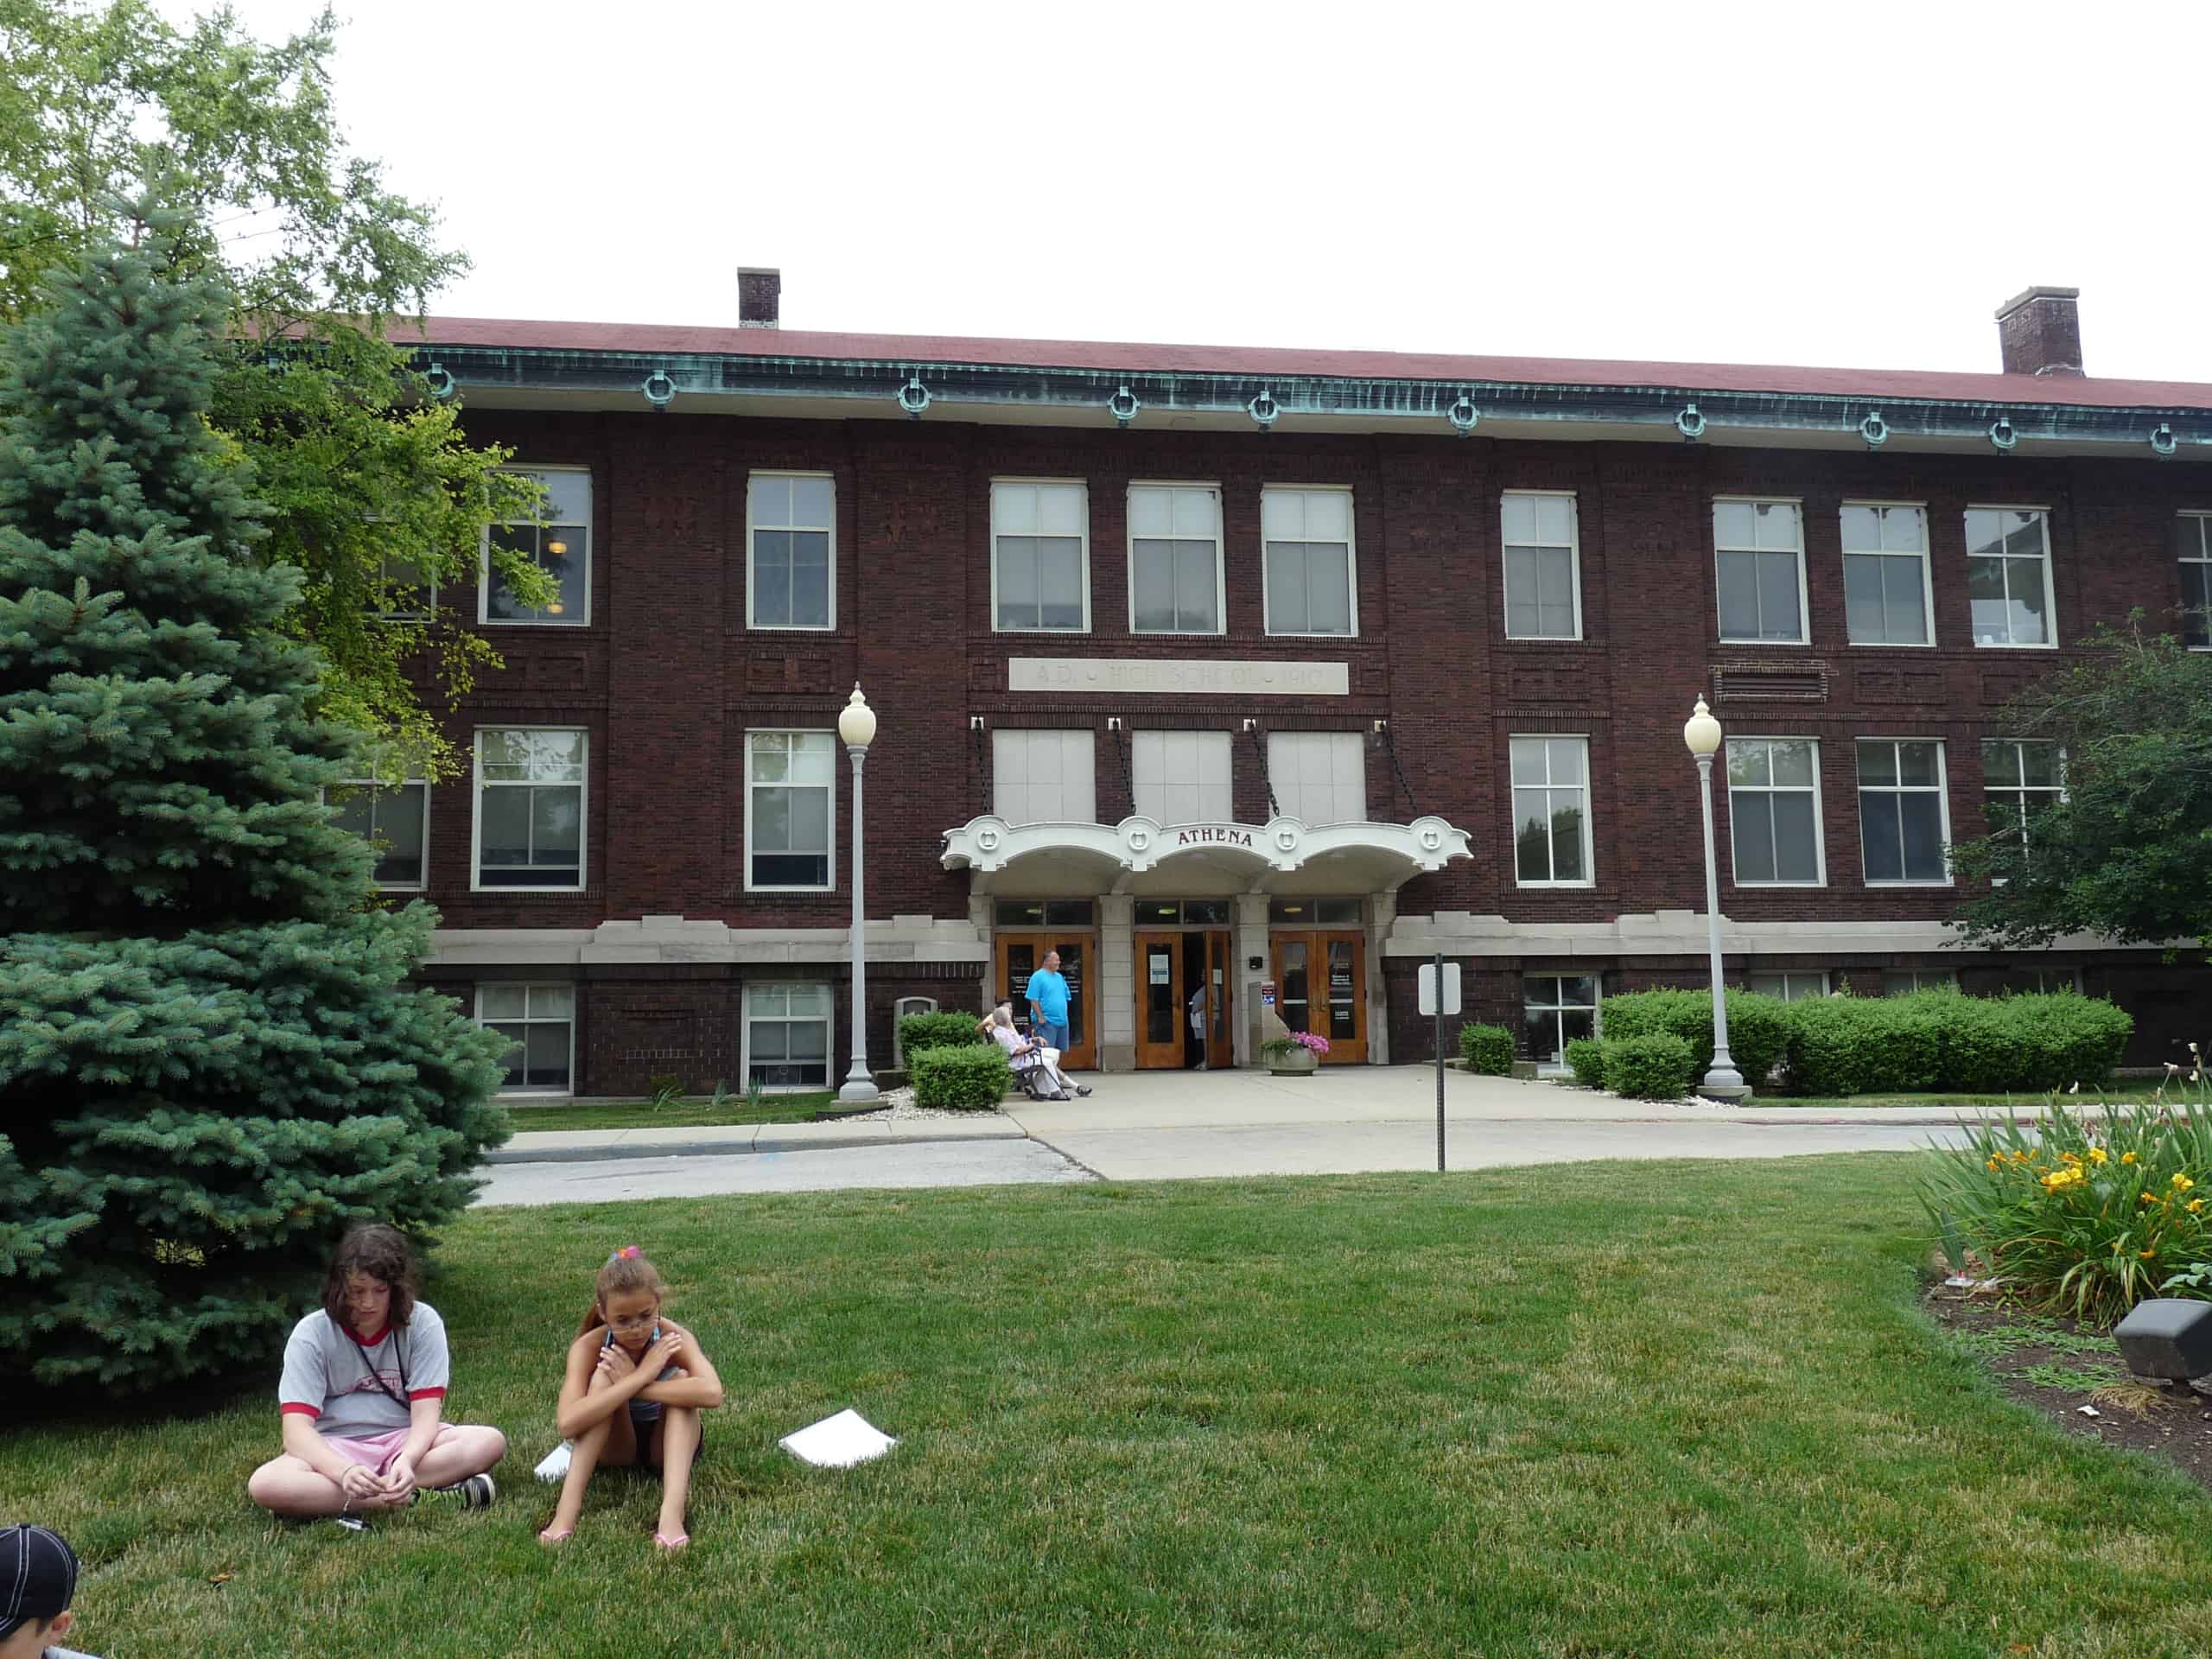 The old Crawfordsville High School, currently the Athena Center. It is a large brick building.